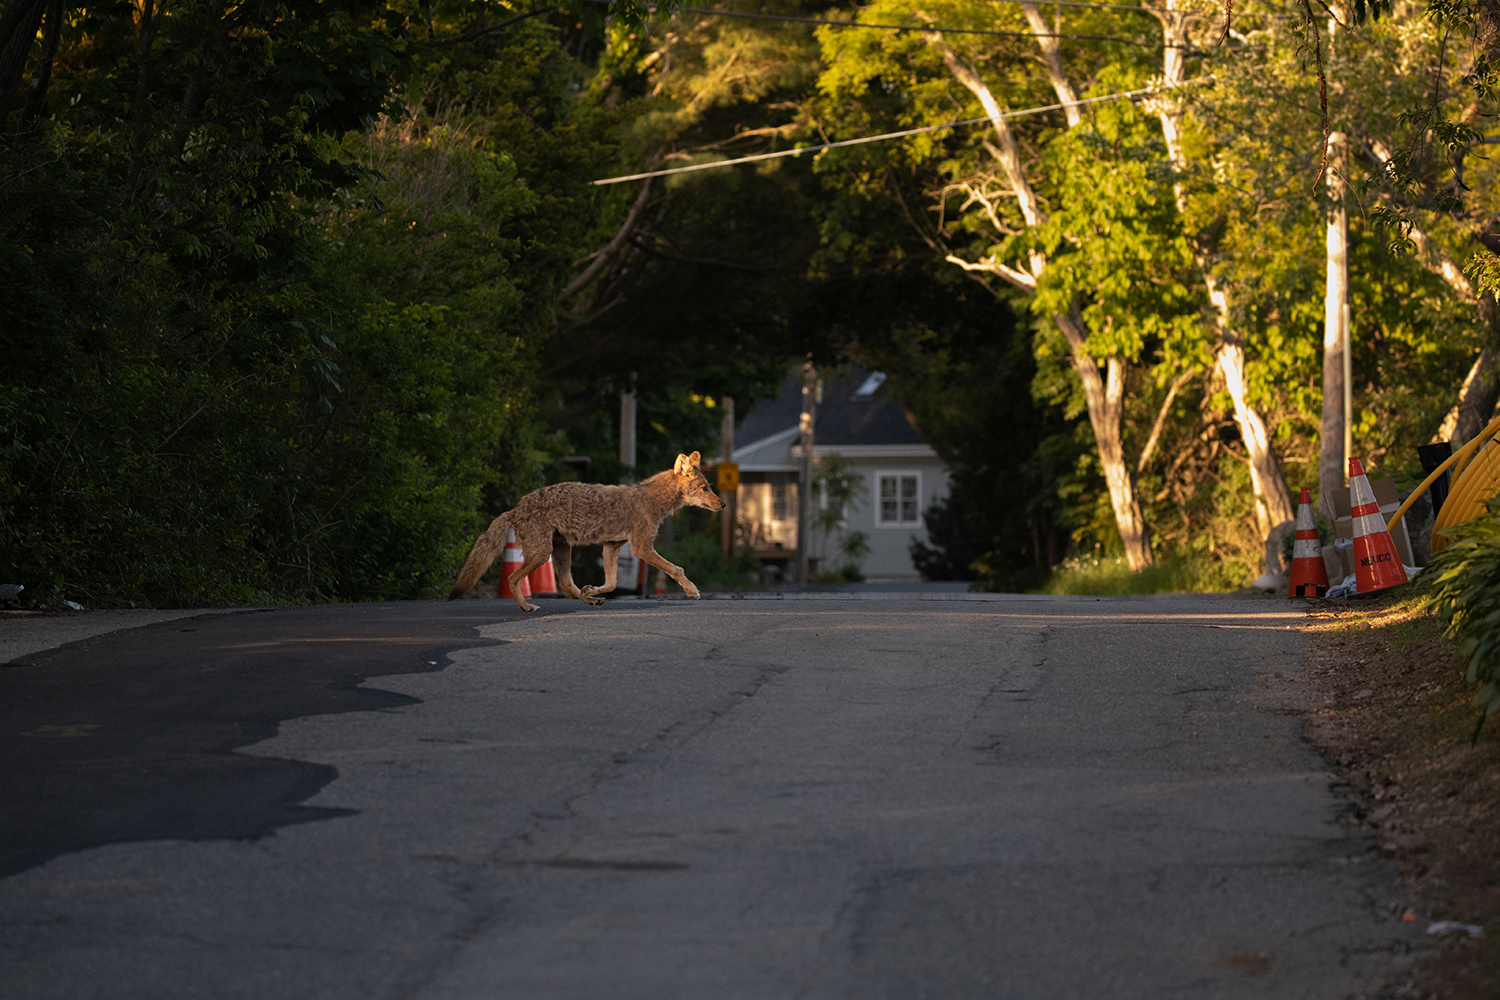 E367: Coyotes in New Jersey: History, Ecology, and Management